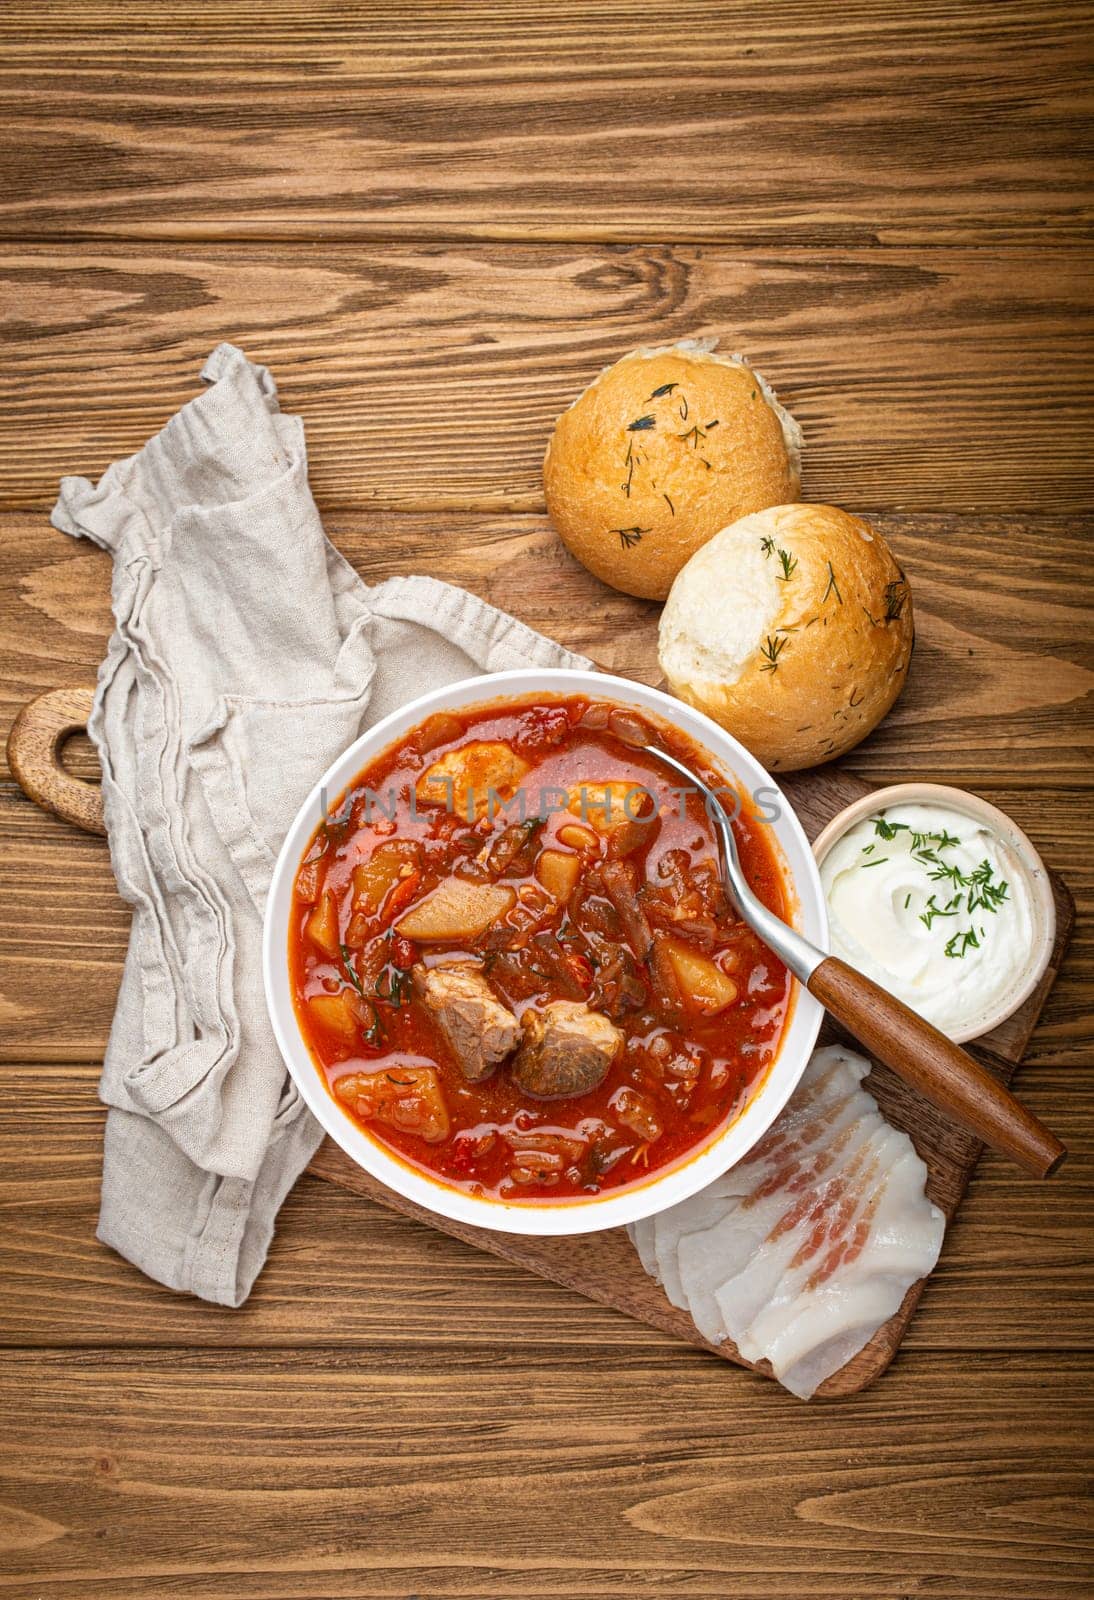 Ukrainian Borscht, red beetroot soup with meat, in white bowl with sour cream, garlic buns Pampushka and salo slices on rustic stone background. Traditional authentic dish of Ukraine